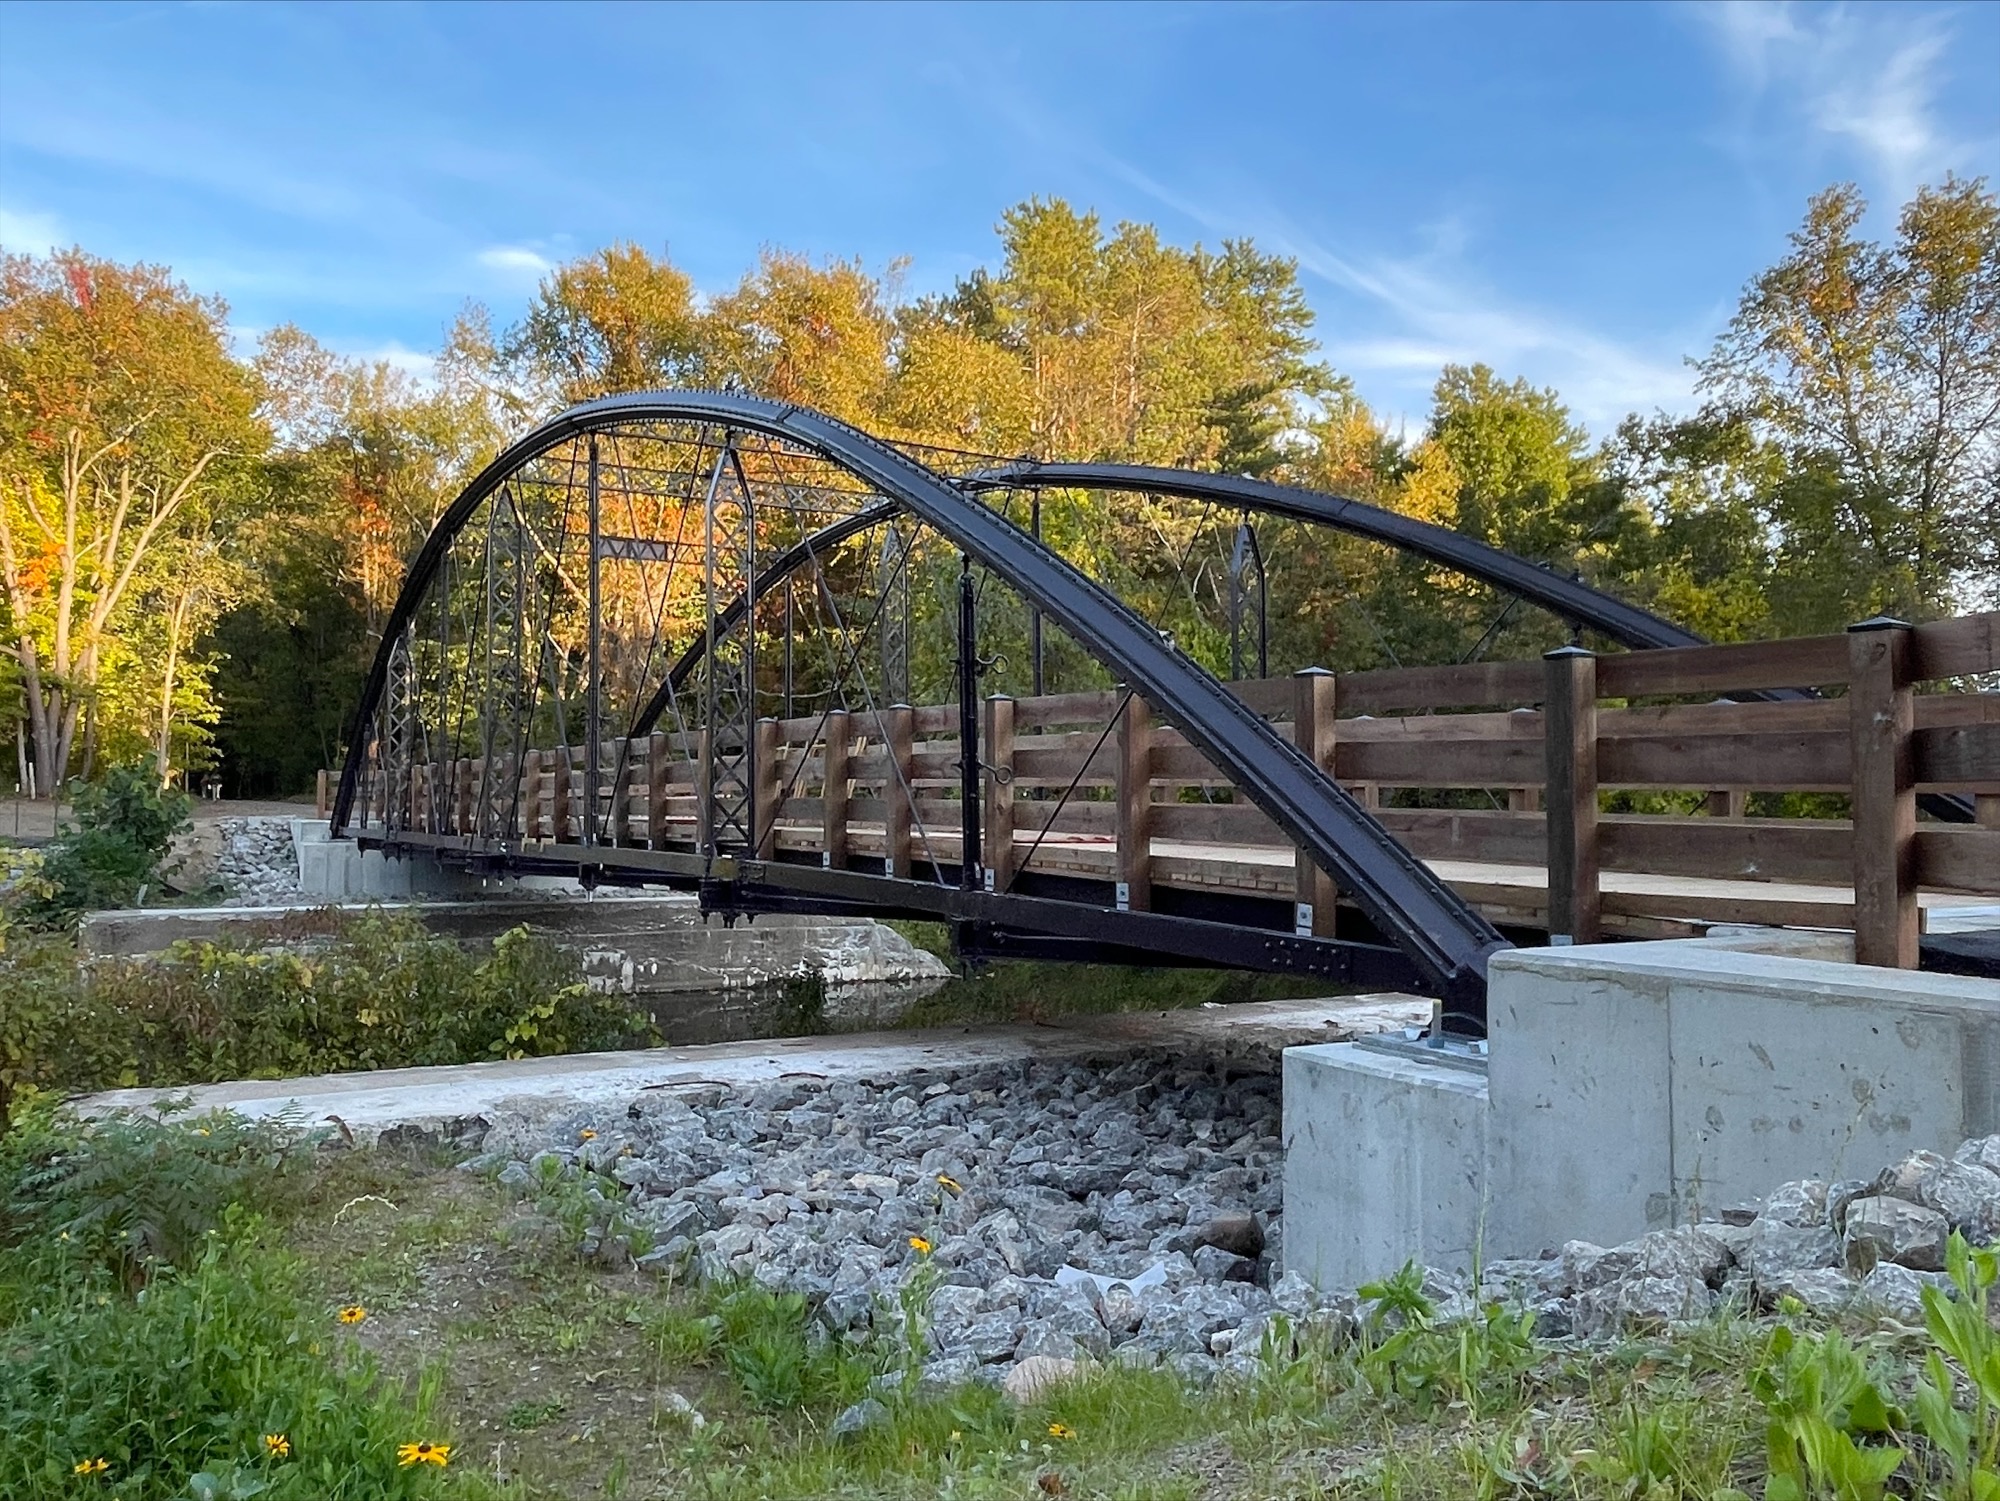 The Messerall Truss Bridge preservation is the focus of a 12-minute video of partnerships.